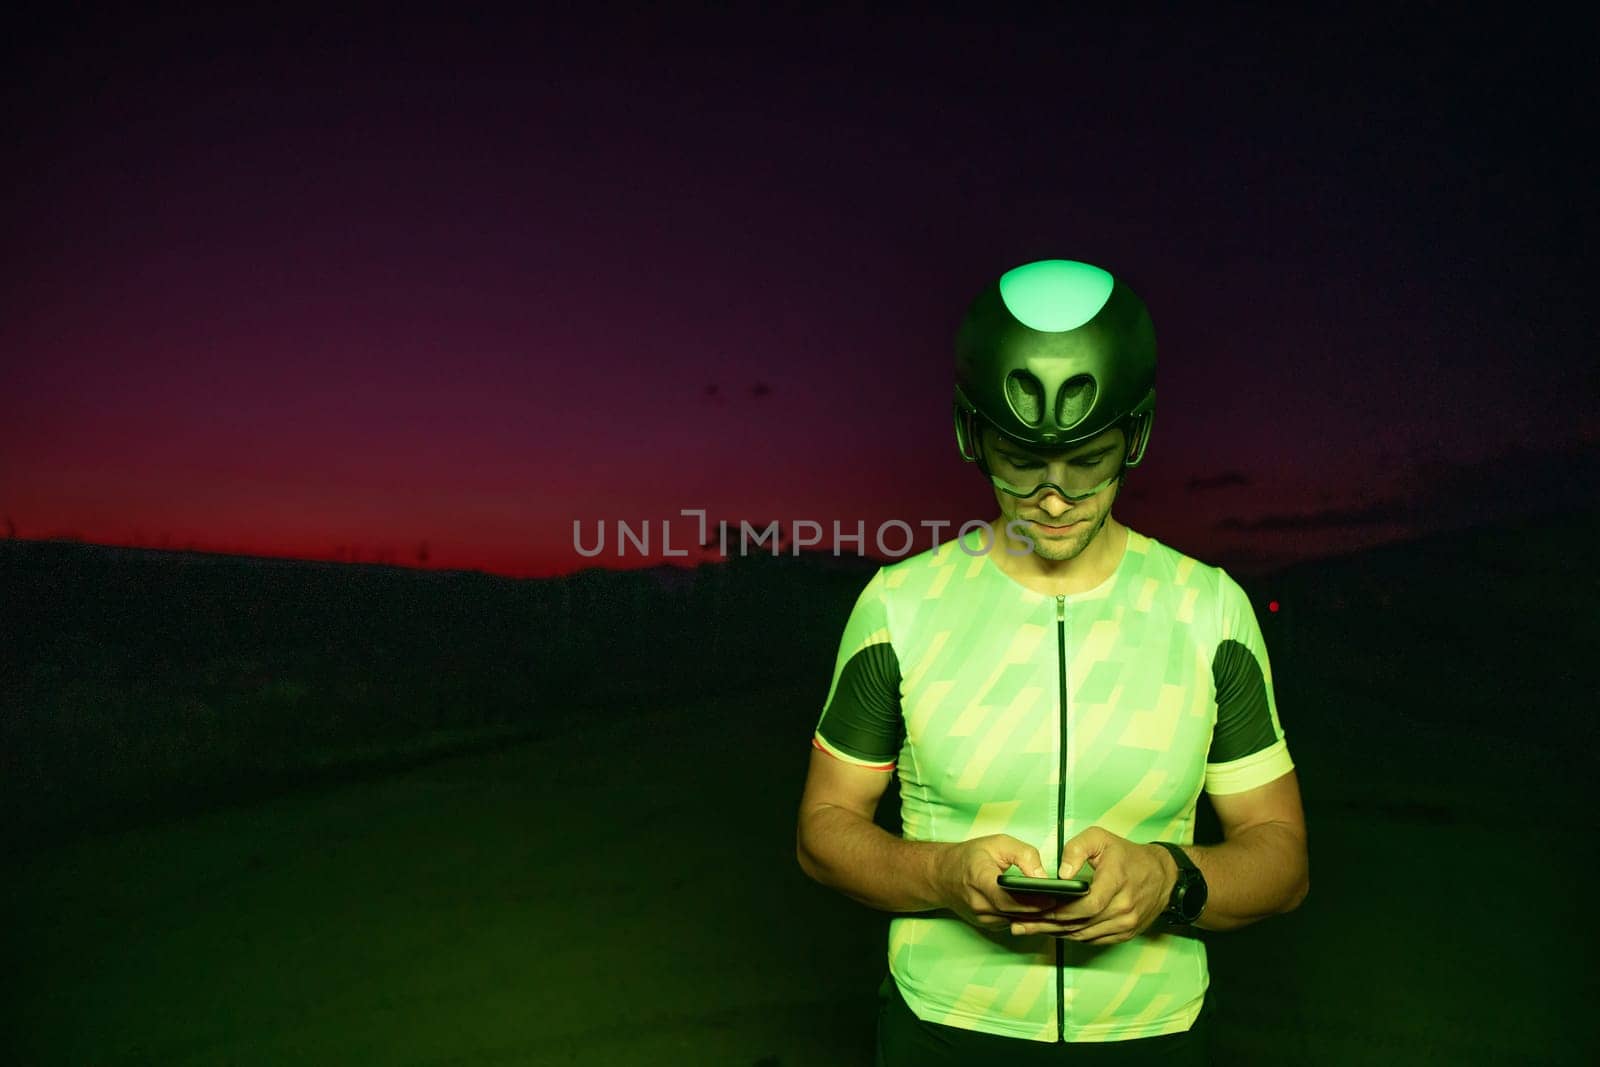 A triathlete using a smartphone while taking a break from a hard night's cycling training. High quality photo